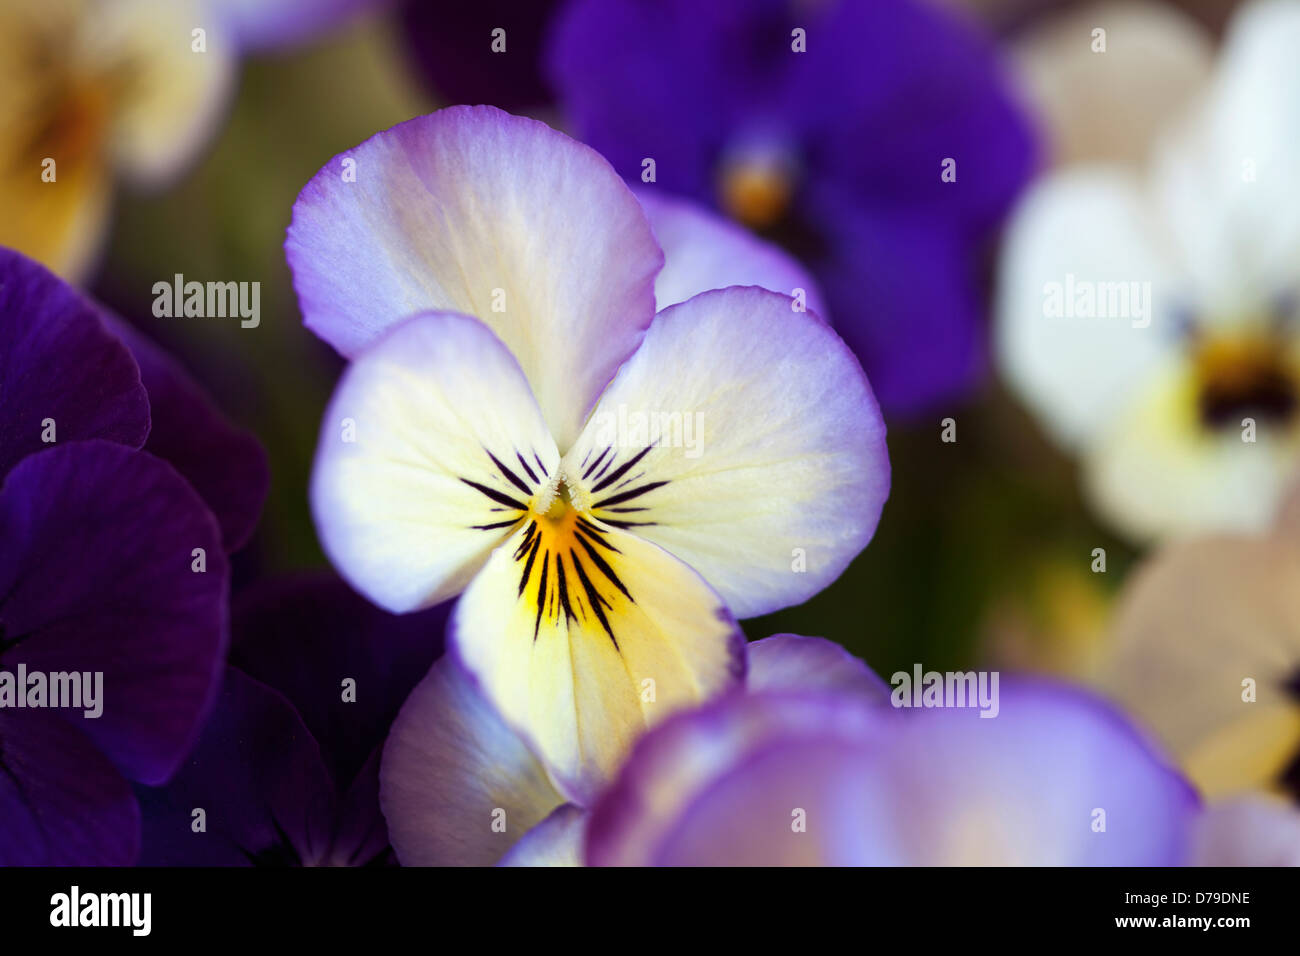 Purple and white flowers of the Pansy, Viola 'Sorbet Ocean Breeze', growing outdoors in a garden. Stock Photo